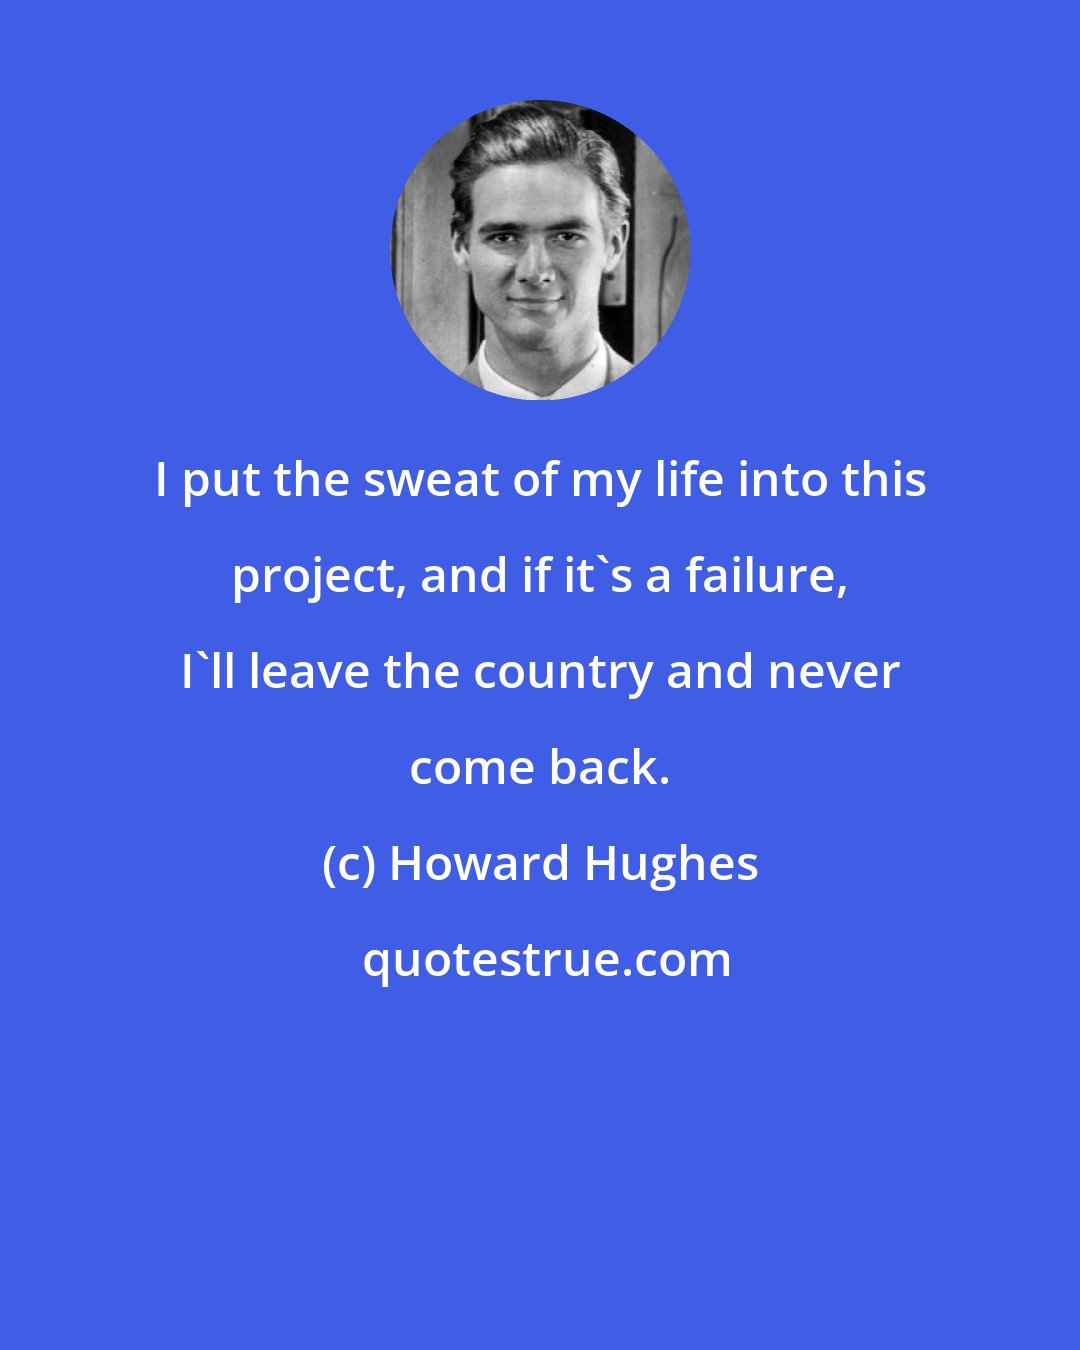 Howard Hughes: I put the sweat of my life into this project, and if it's a failure, I'll leave the country and never come back.